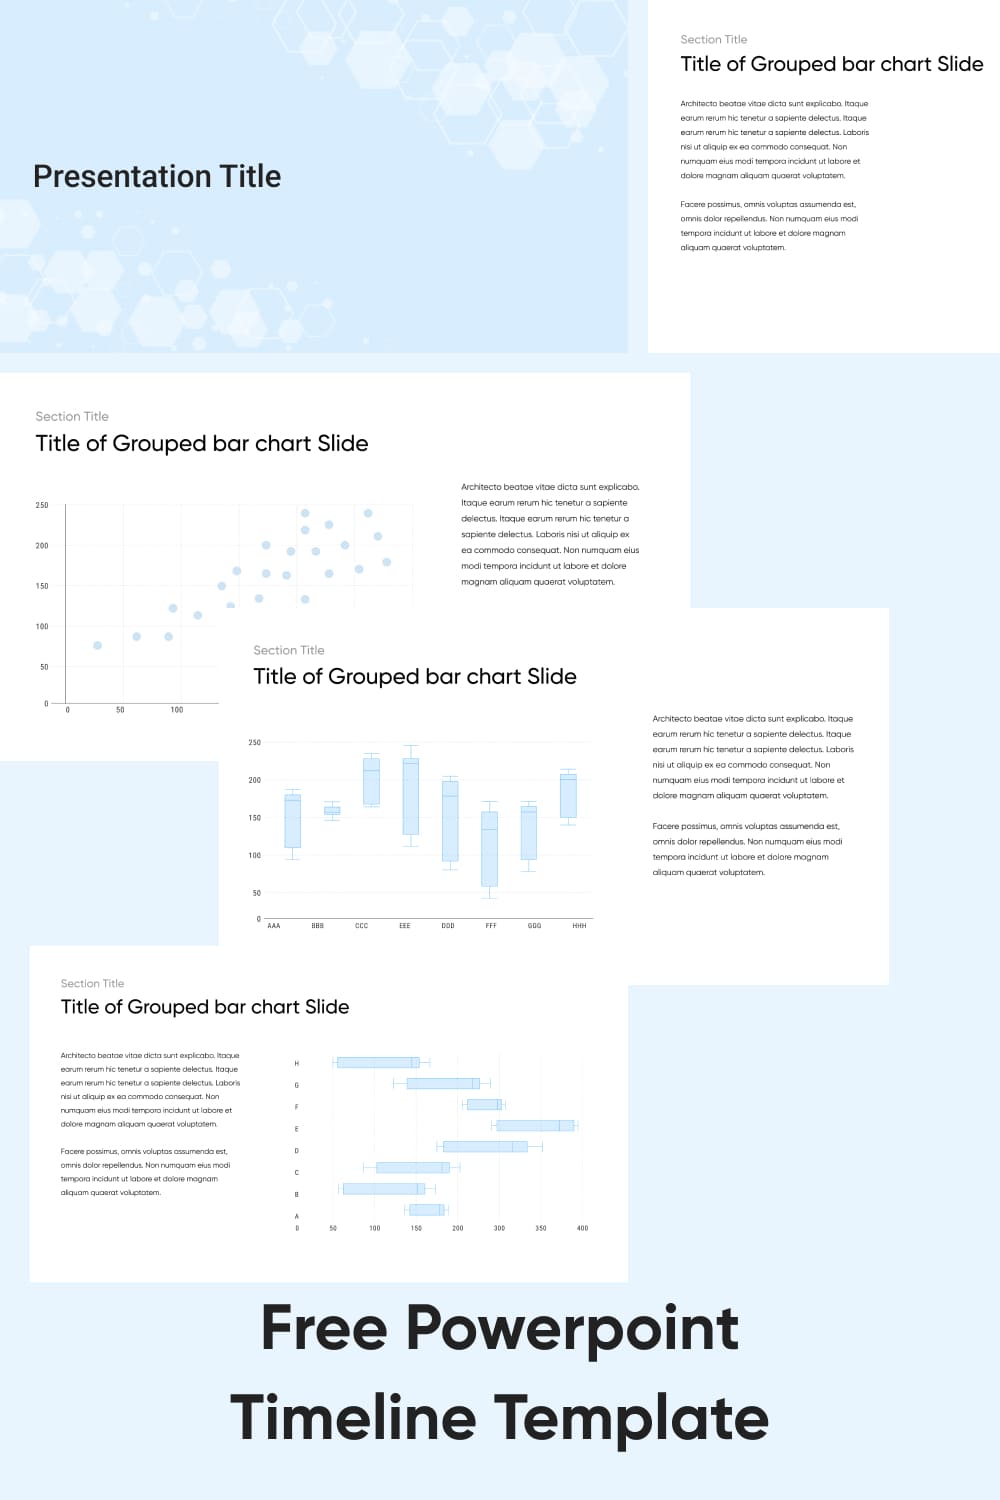 Pinterest of powerpoint timeline template.